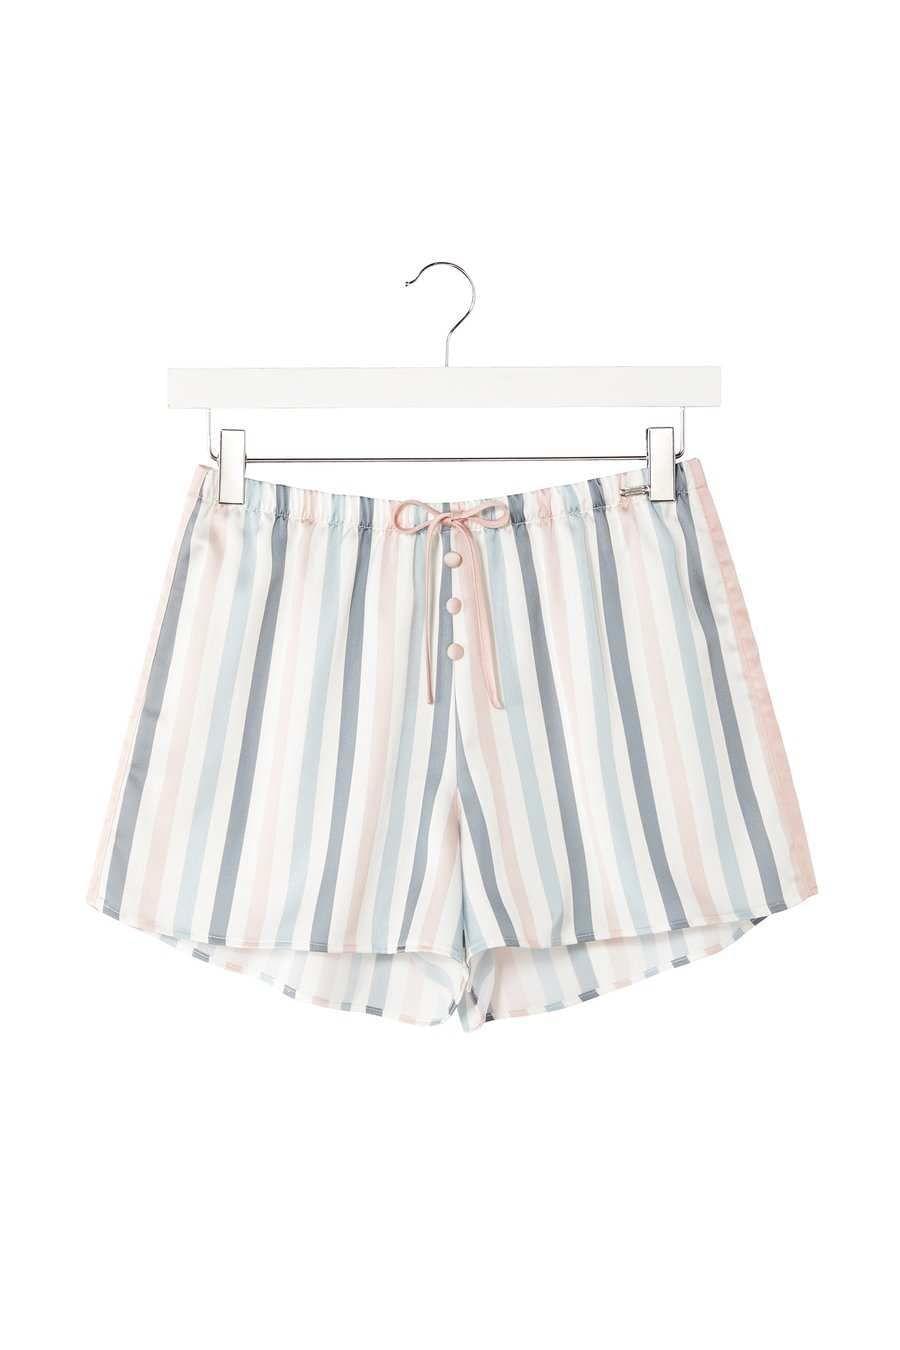 Mix and Match Candy Shorts in Multi Stripe Colours